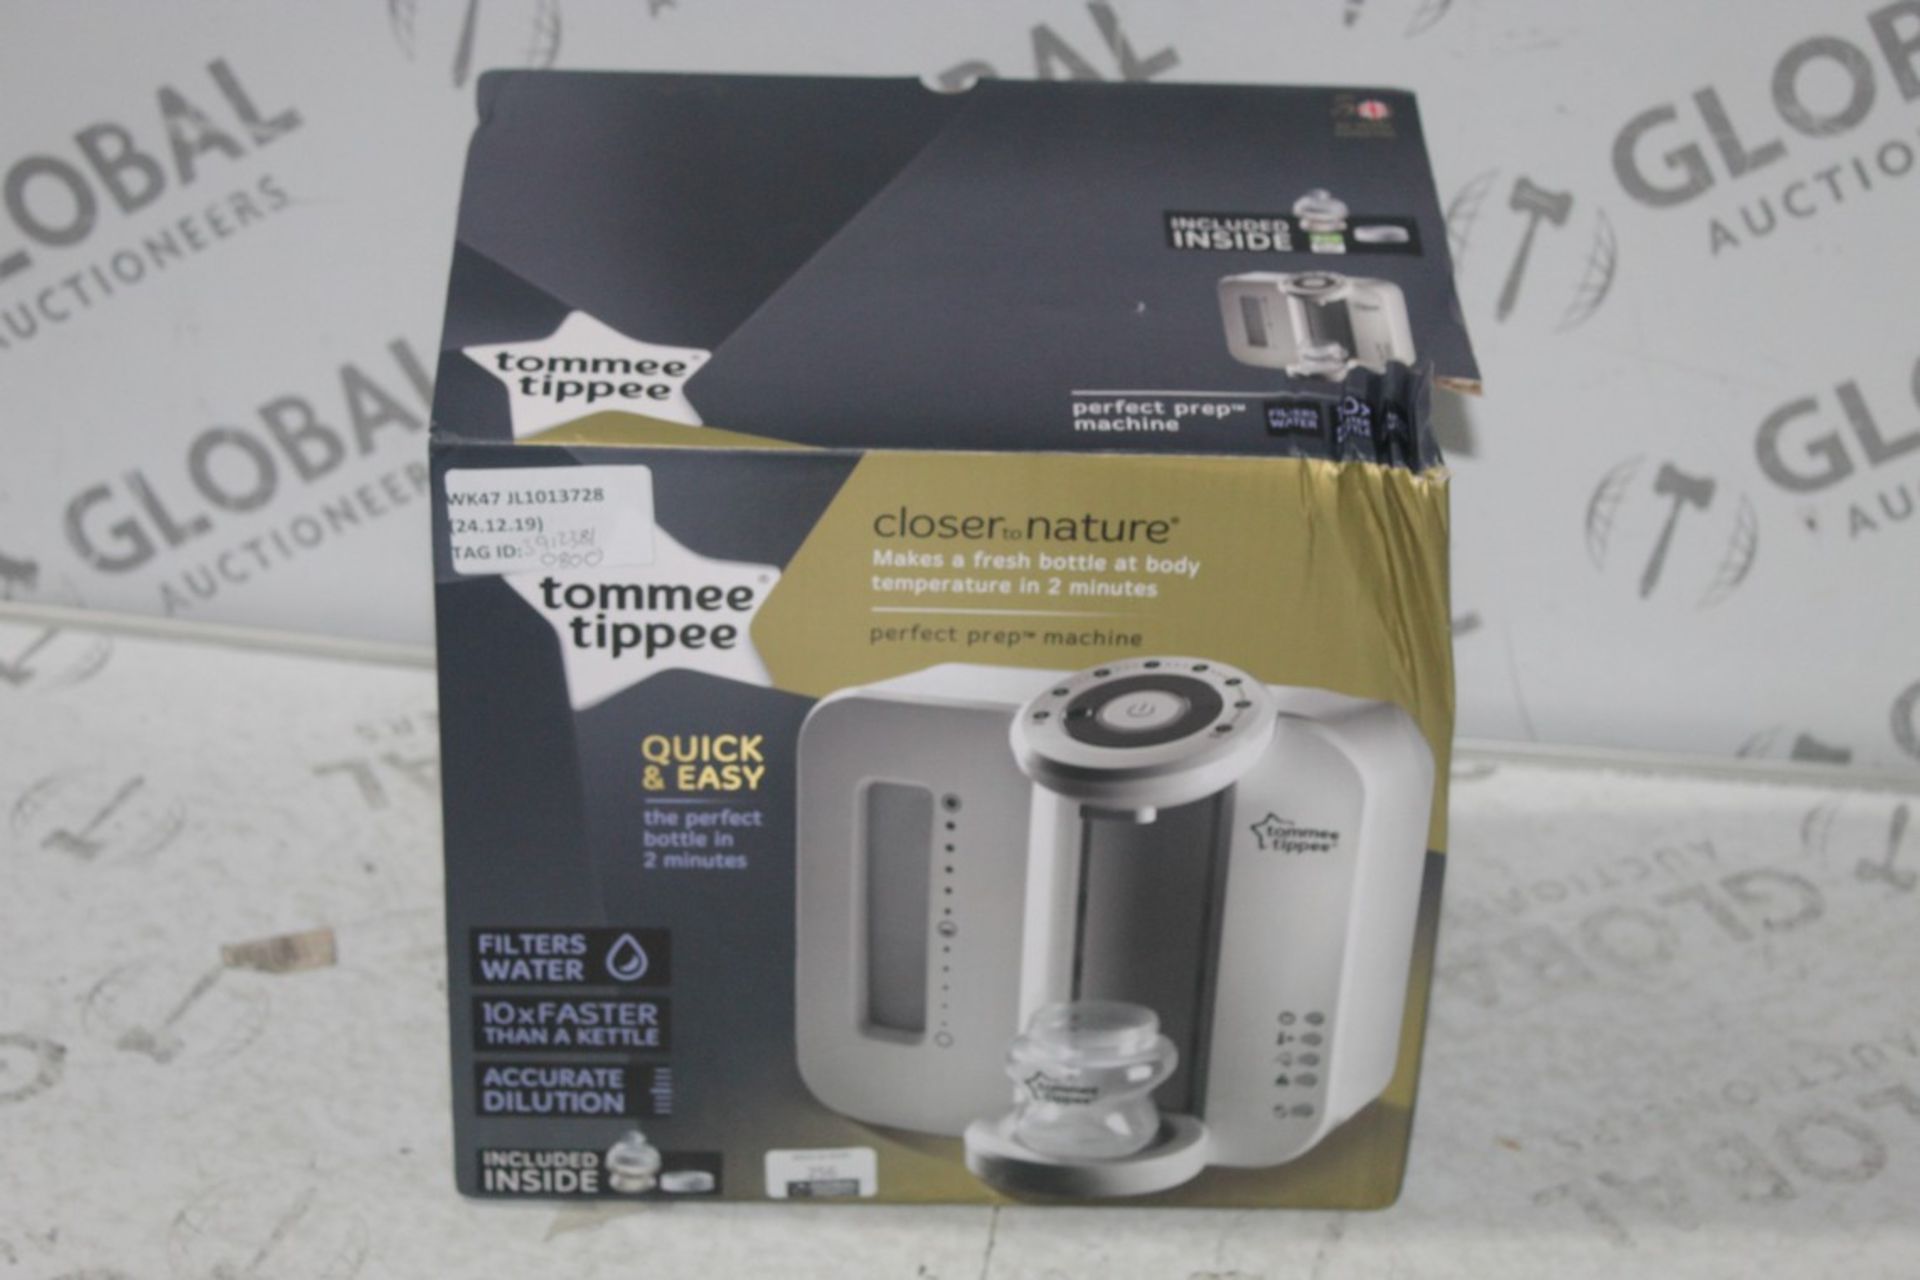 Tommee Tippee Closer to Nature Perfect Preparation Machine RRP £80 (3912381) (Public Viewing and